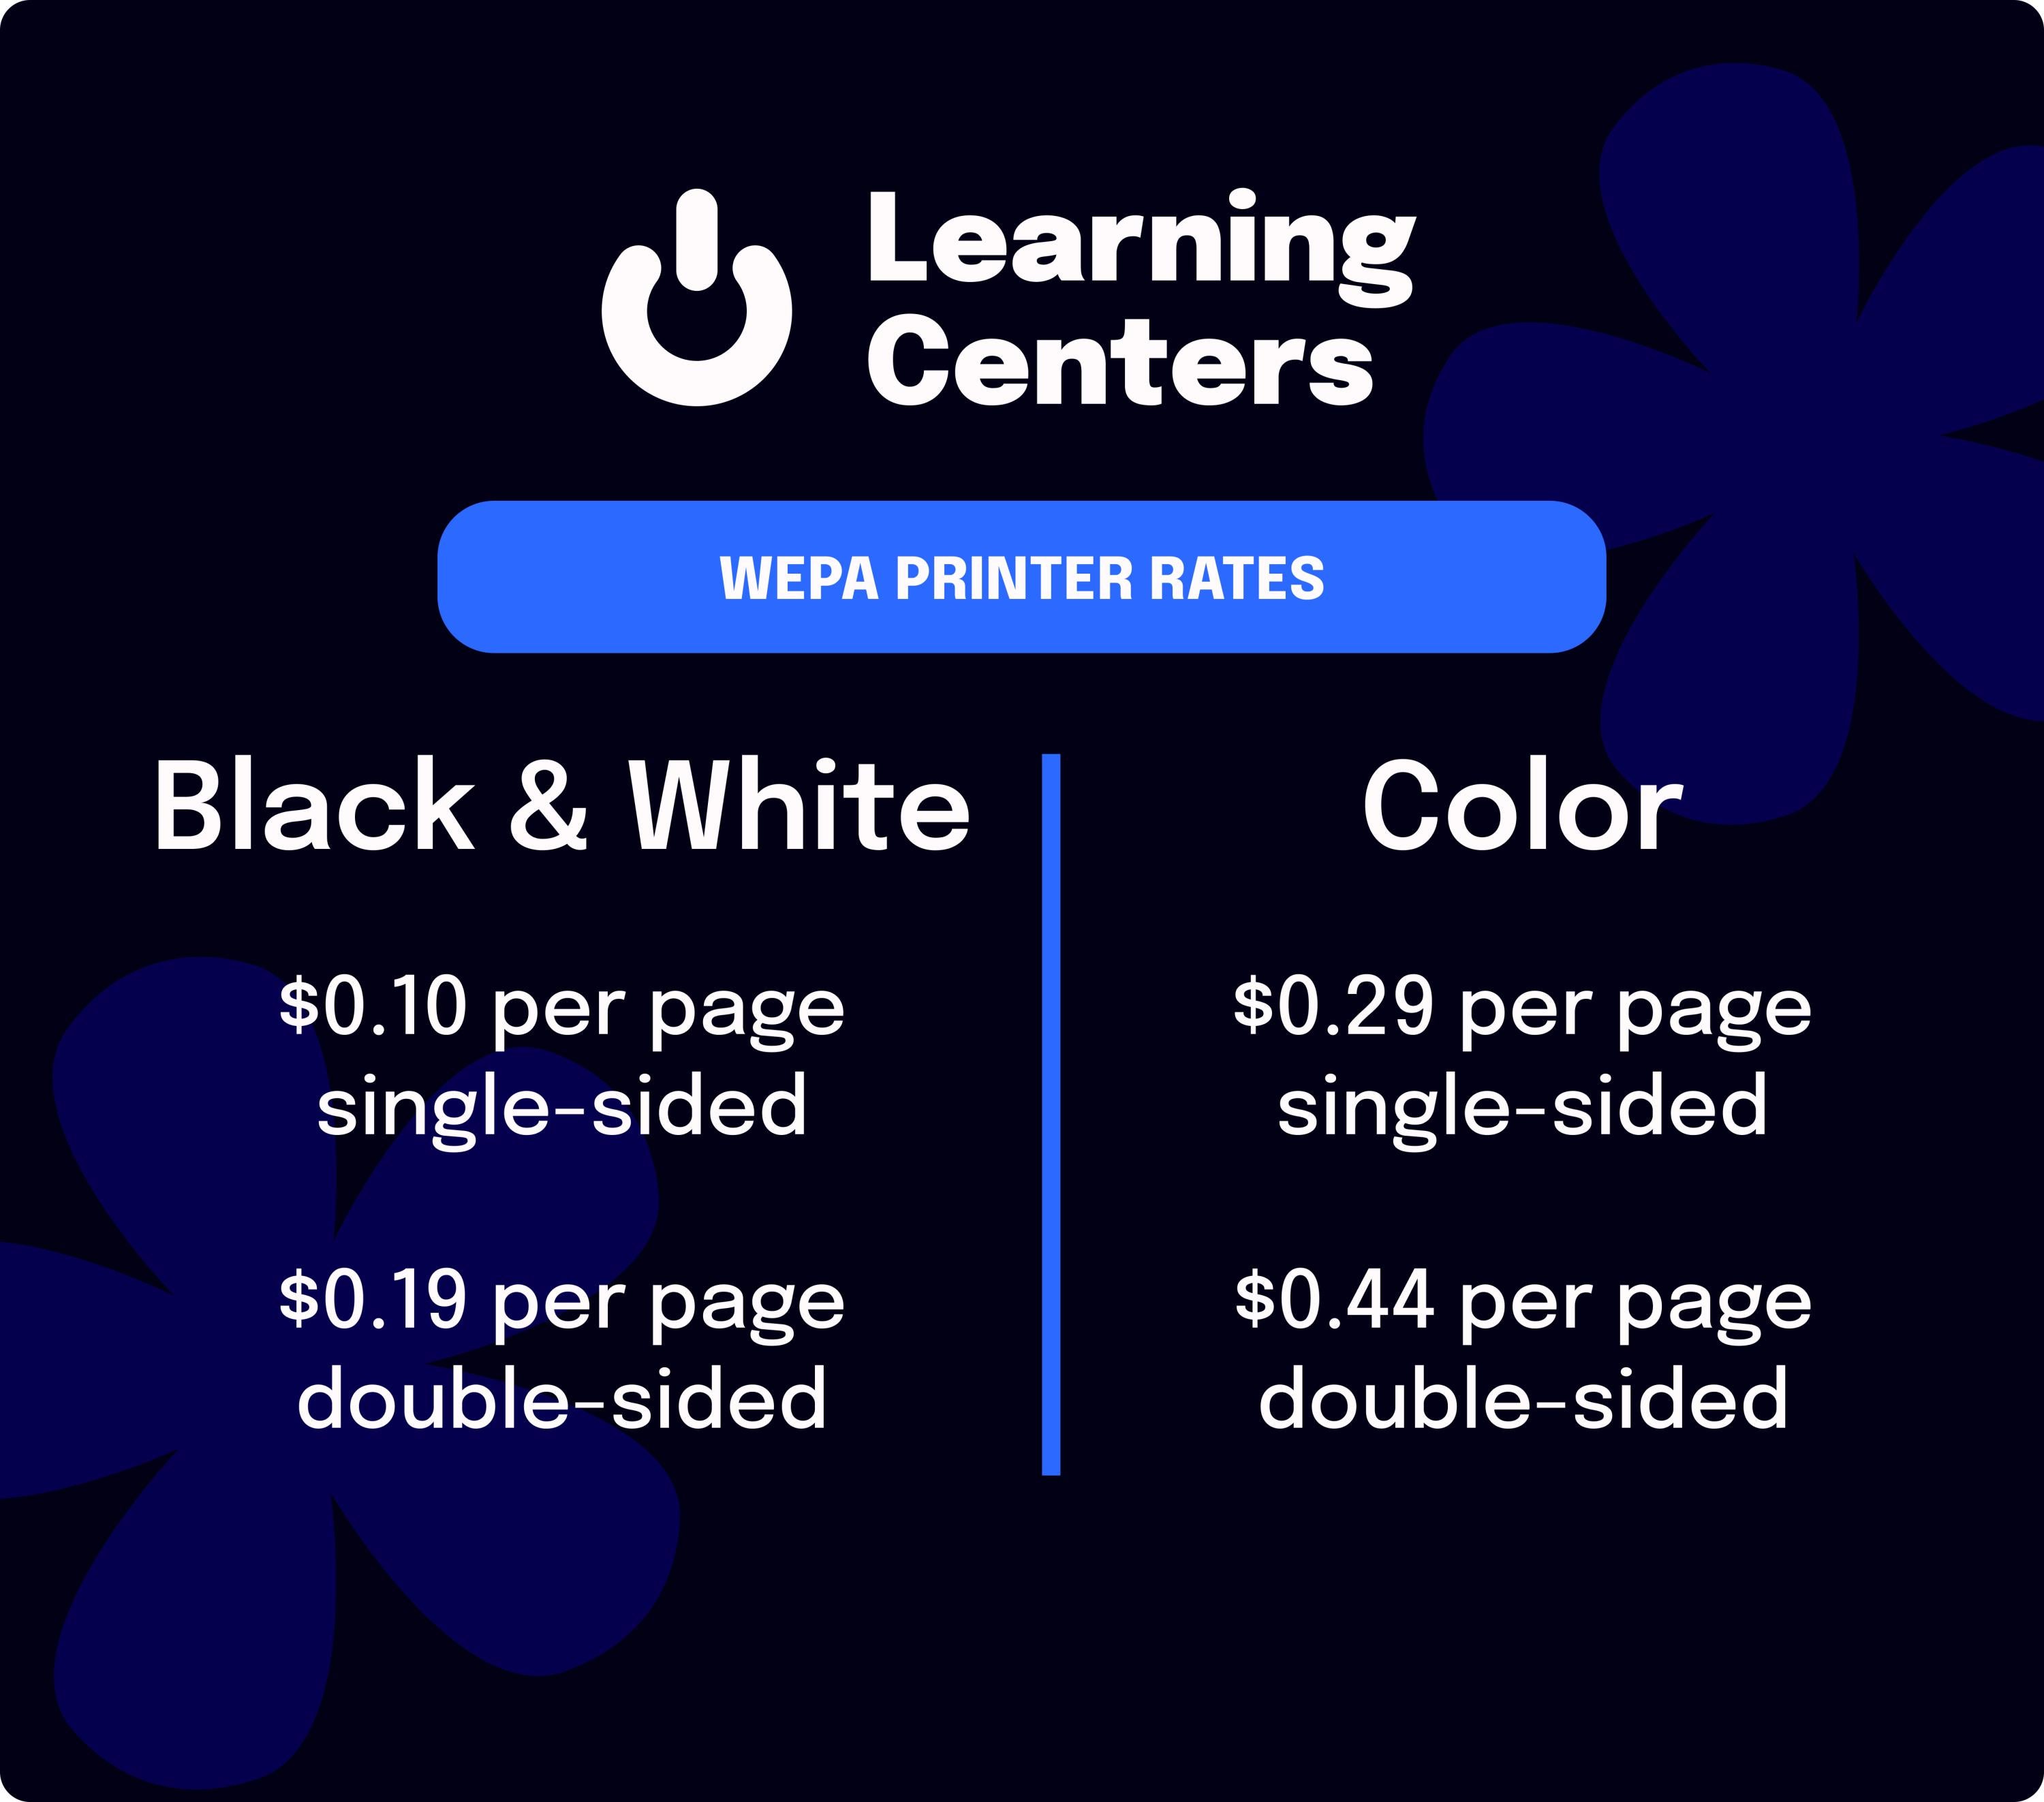 pictures shows wepa rates. For black and white single sided pages it is 10 cents. For double sided B&W  it is 19 cents. For color it is 29 cents per single sided page and 44 cents per double sided page